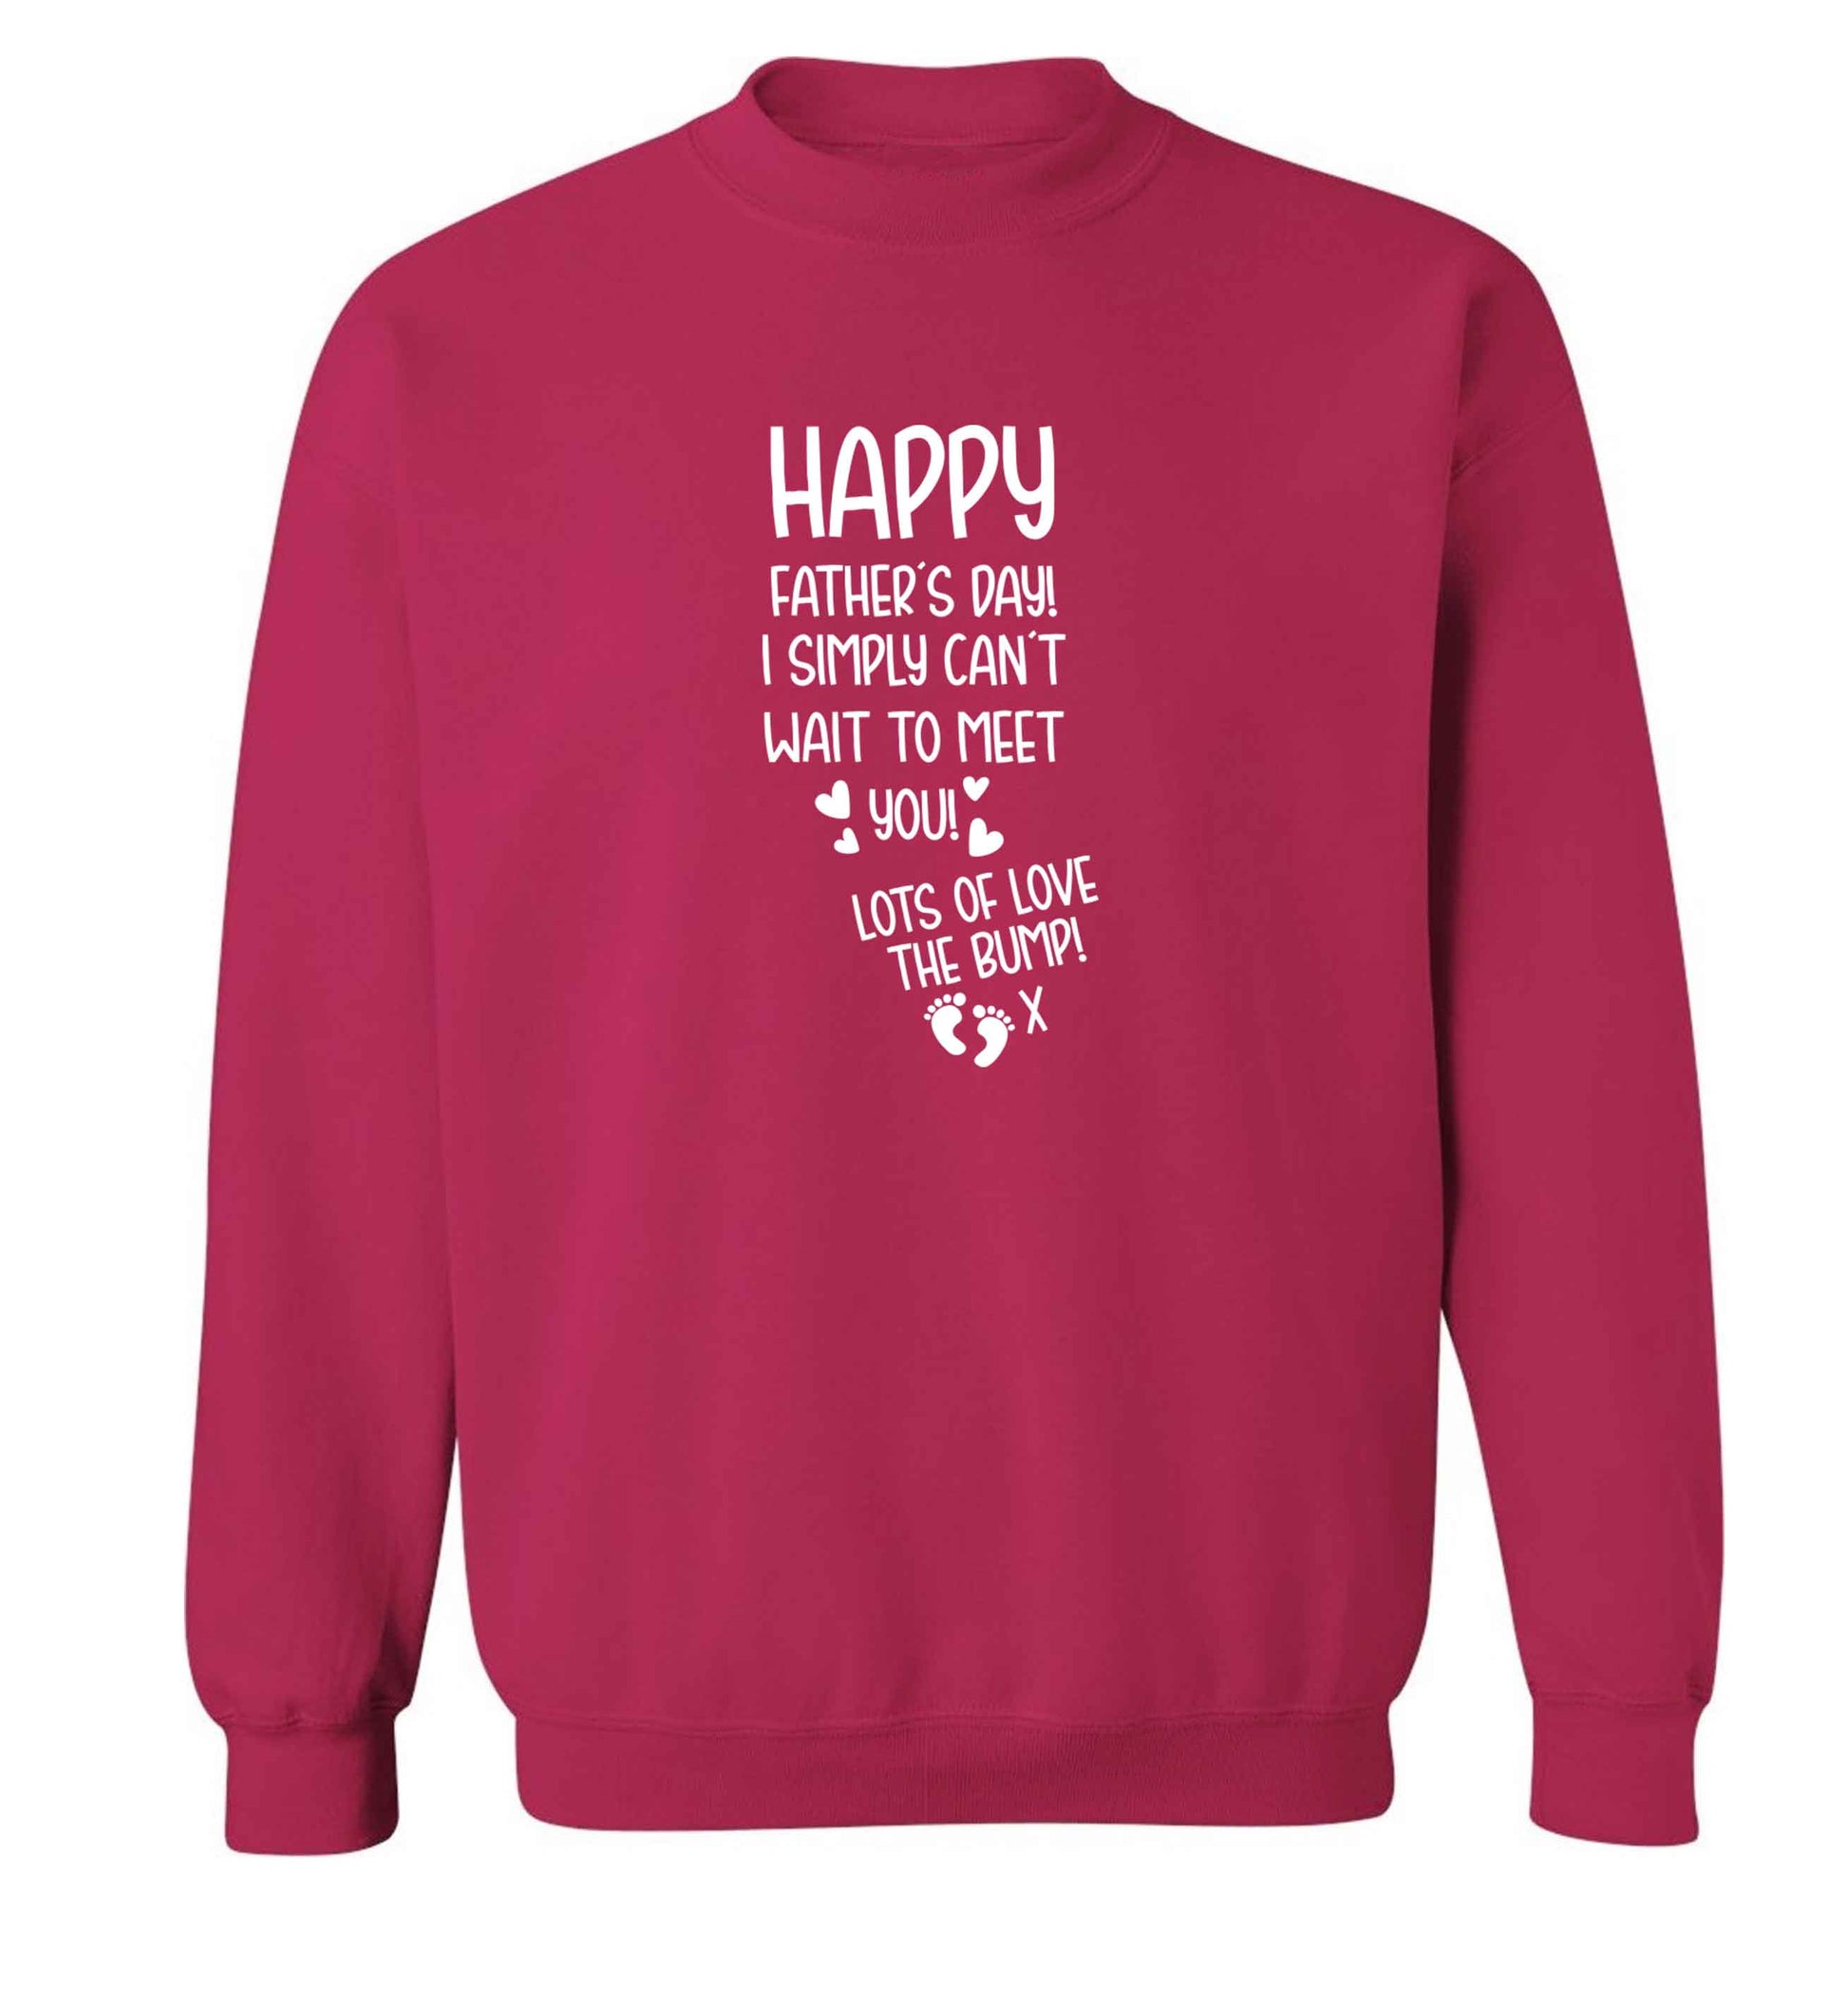 Happy Father's day daddy I can't wait to meet you lot's of love the bump! adult's unisex pink sweater 2XL